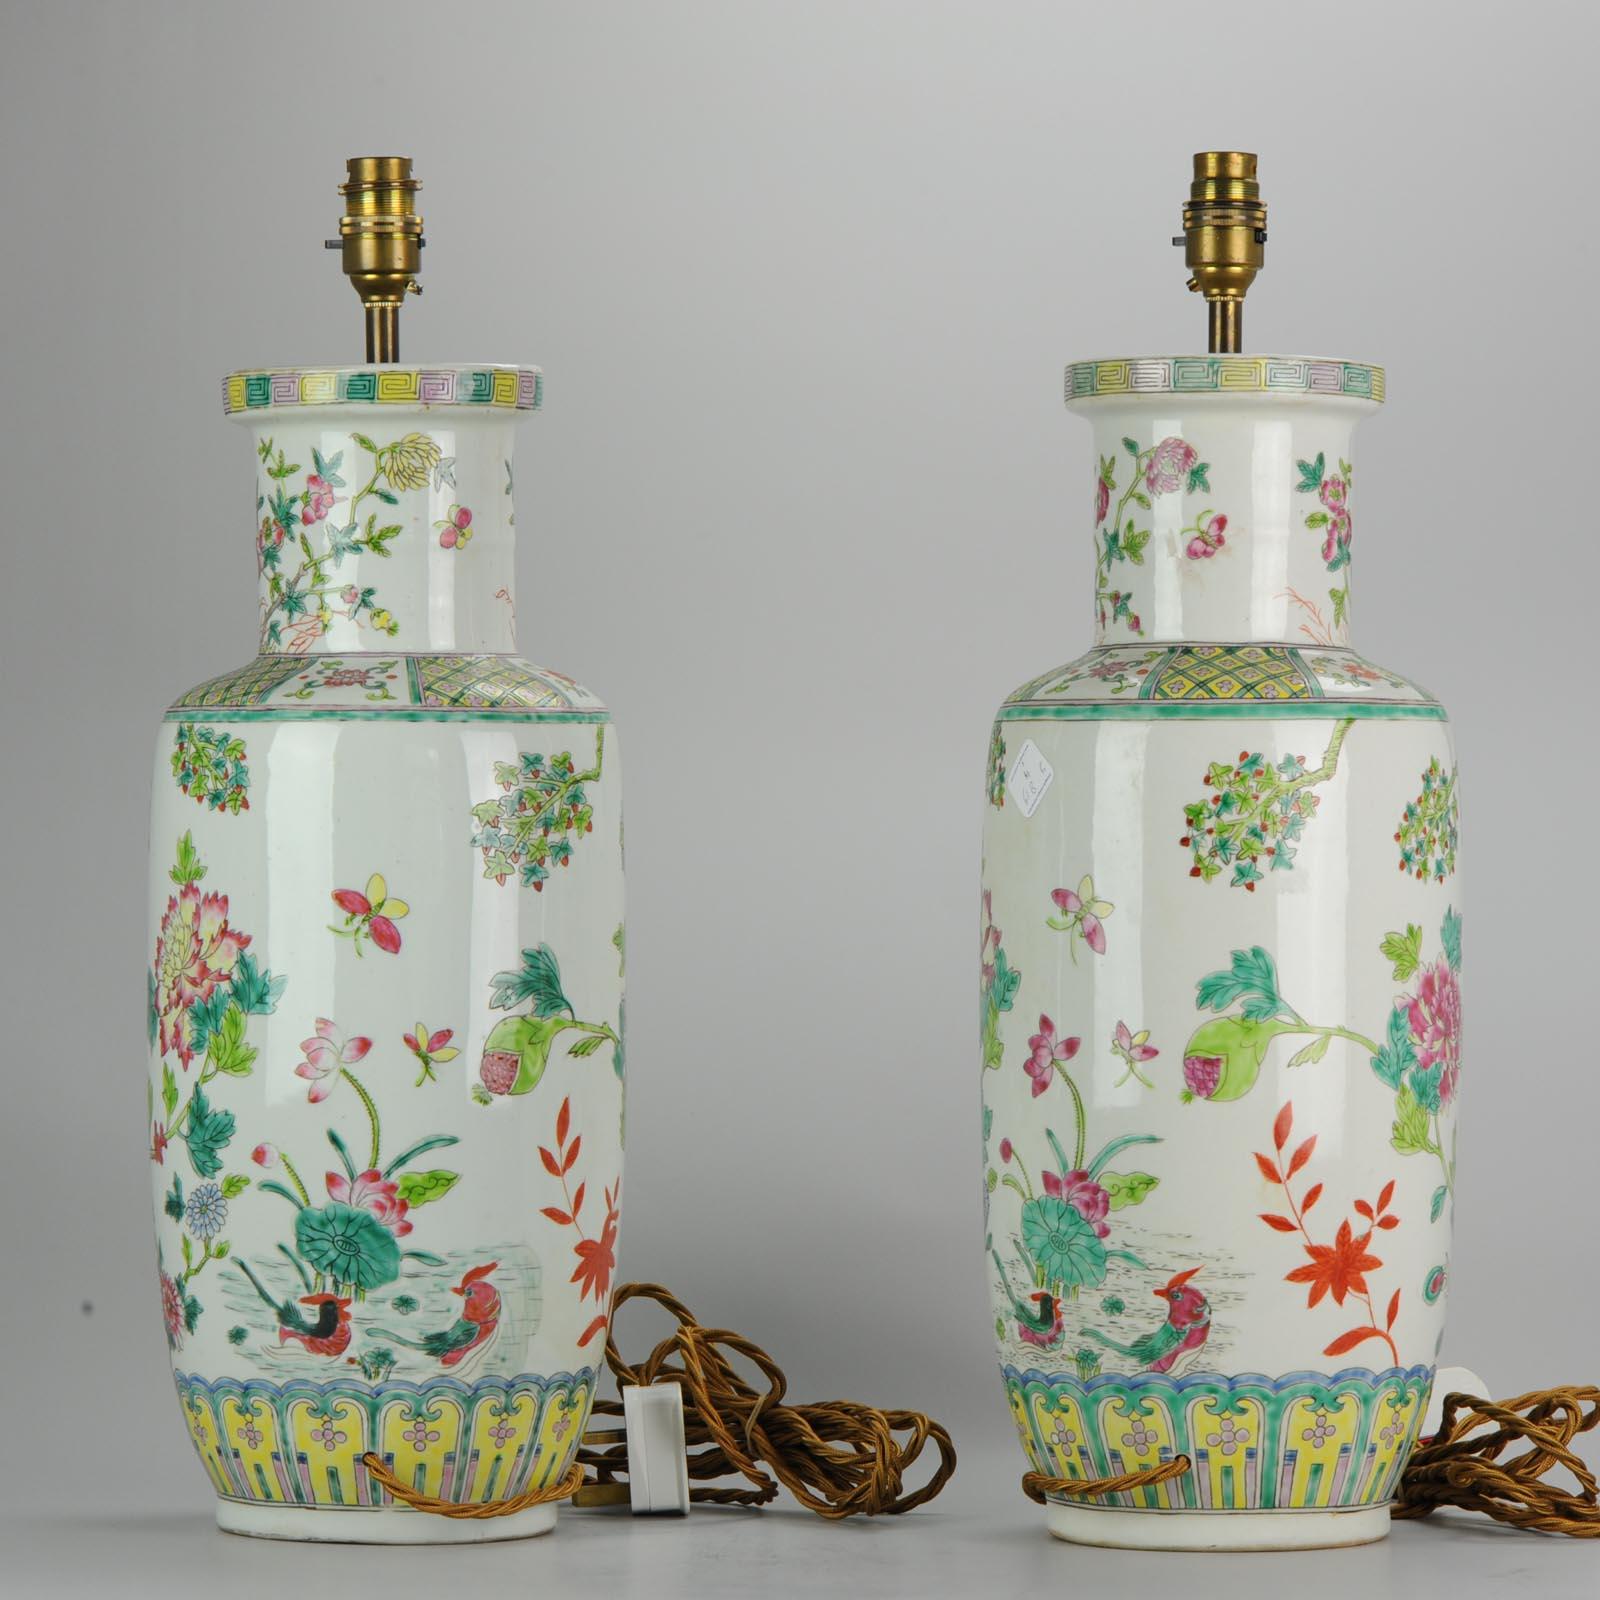 20th Century Chinese Porcelain Vases PRoC Lamp Fenghuang Bird Vases Roses, Pair In Excellent Condition For Sale In Amsterdam, Noord Holland